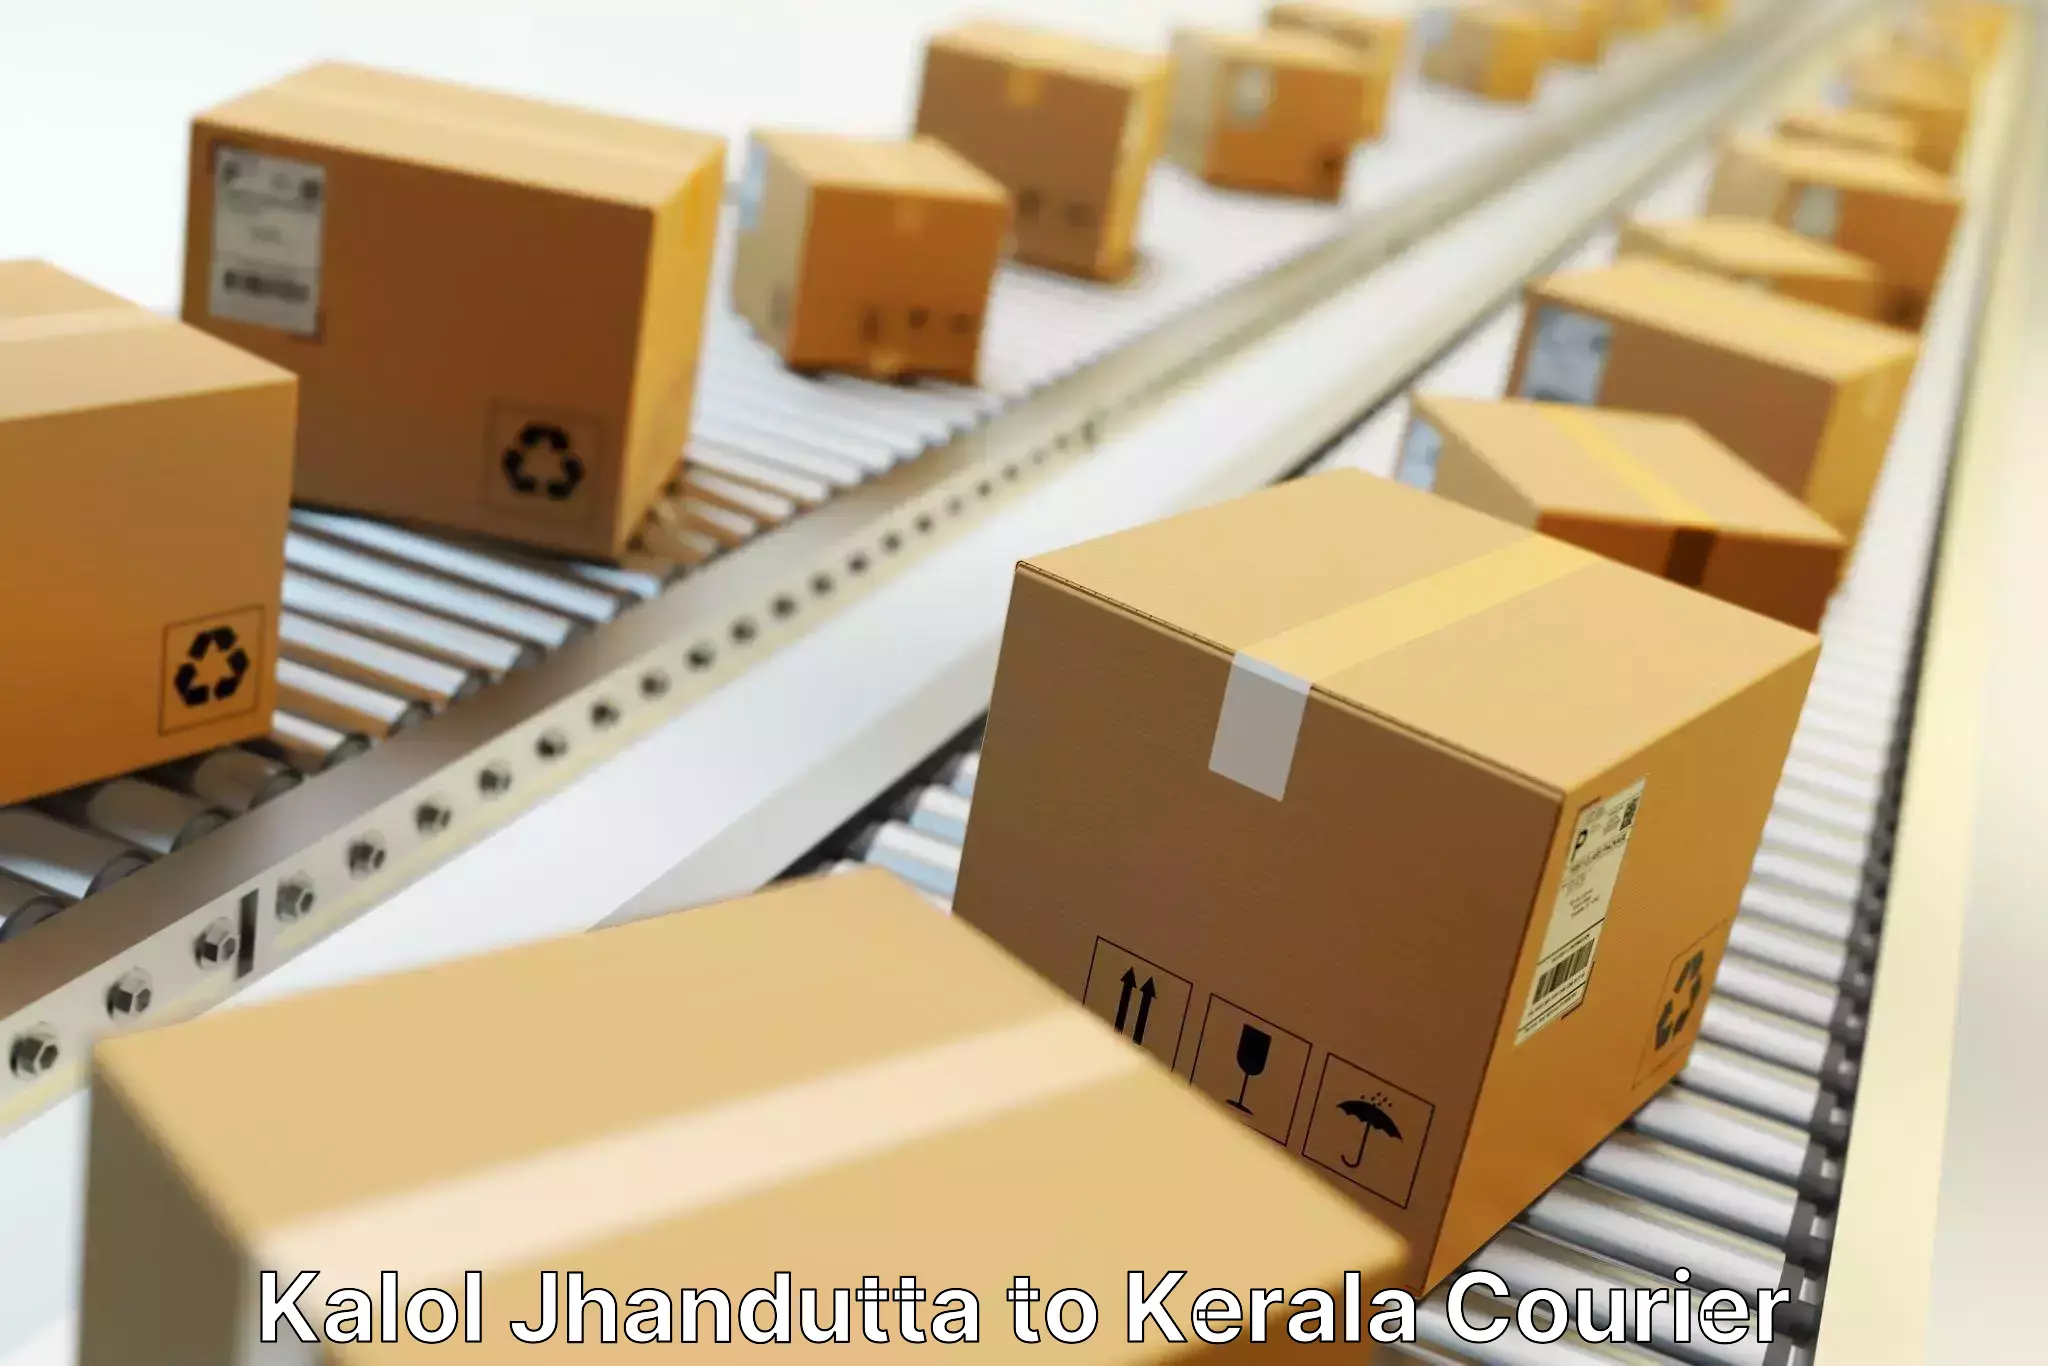 Special handling courier Kalol Jhandutta to Cochin University of Science and Technology